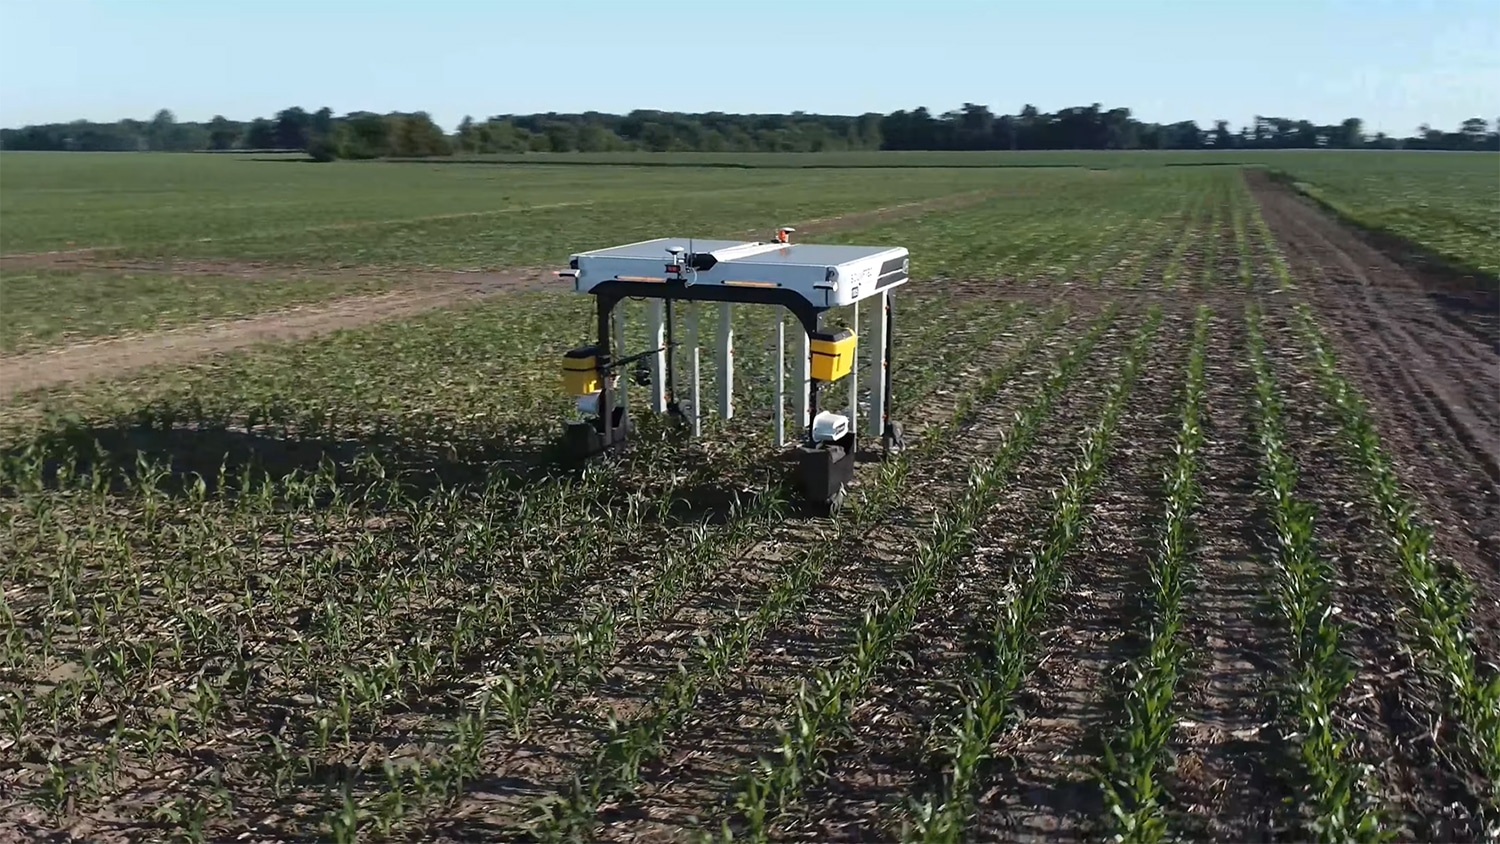 Solinftec's Solix Sprayer robot autonomously detects and sprays weeds.